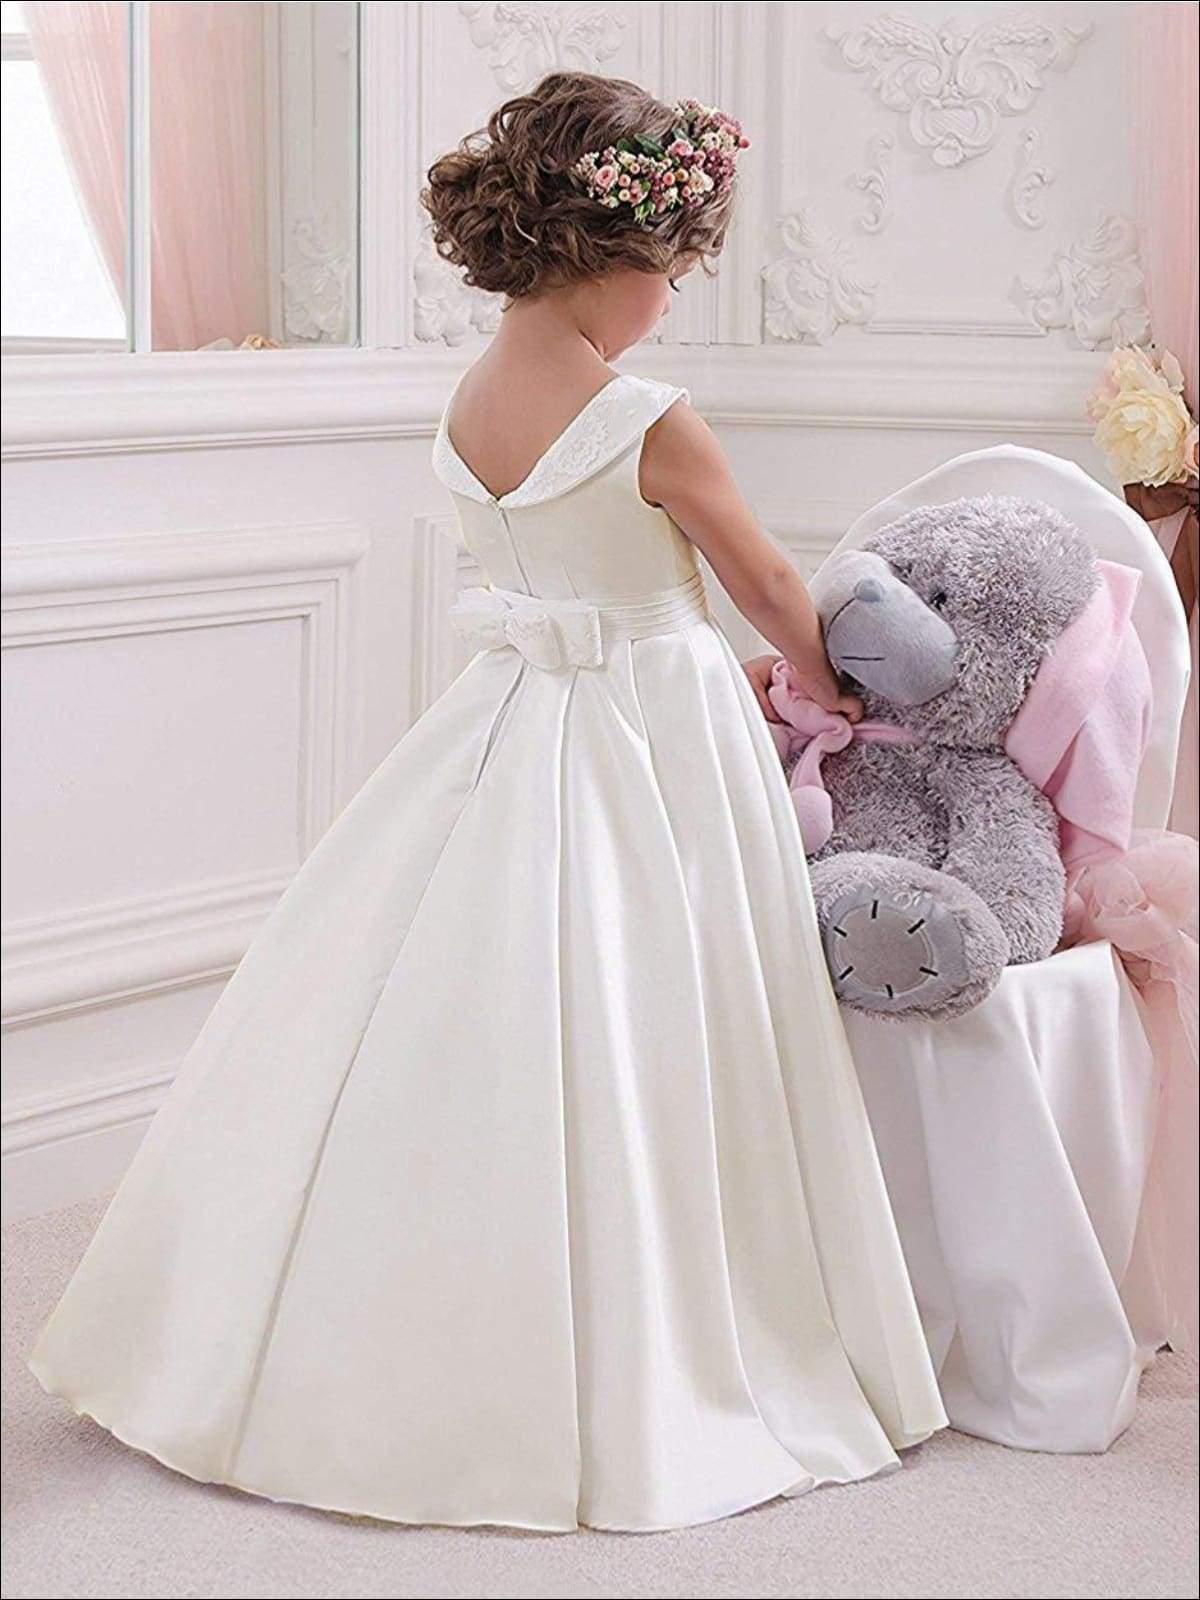 Girls Vintage Style Embellished Floor Length Gown with Crystal Applique - Girls Gown